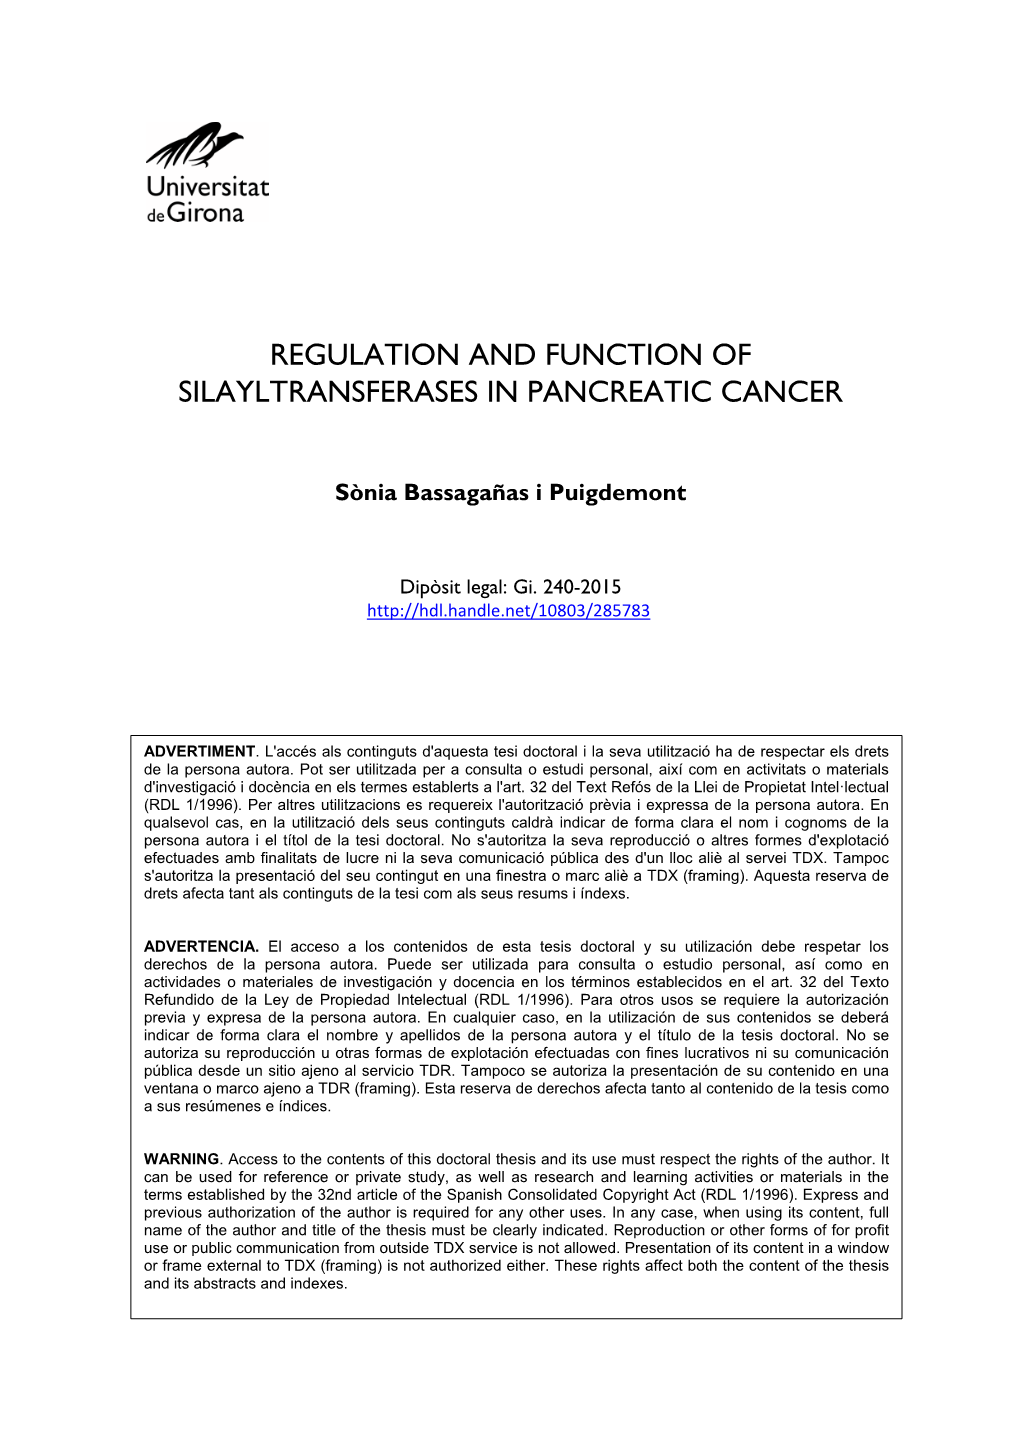 Regulation and Function of Silayltransferases in Pancreatic Cancer